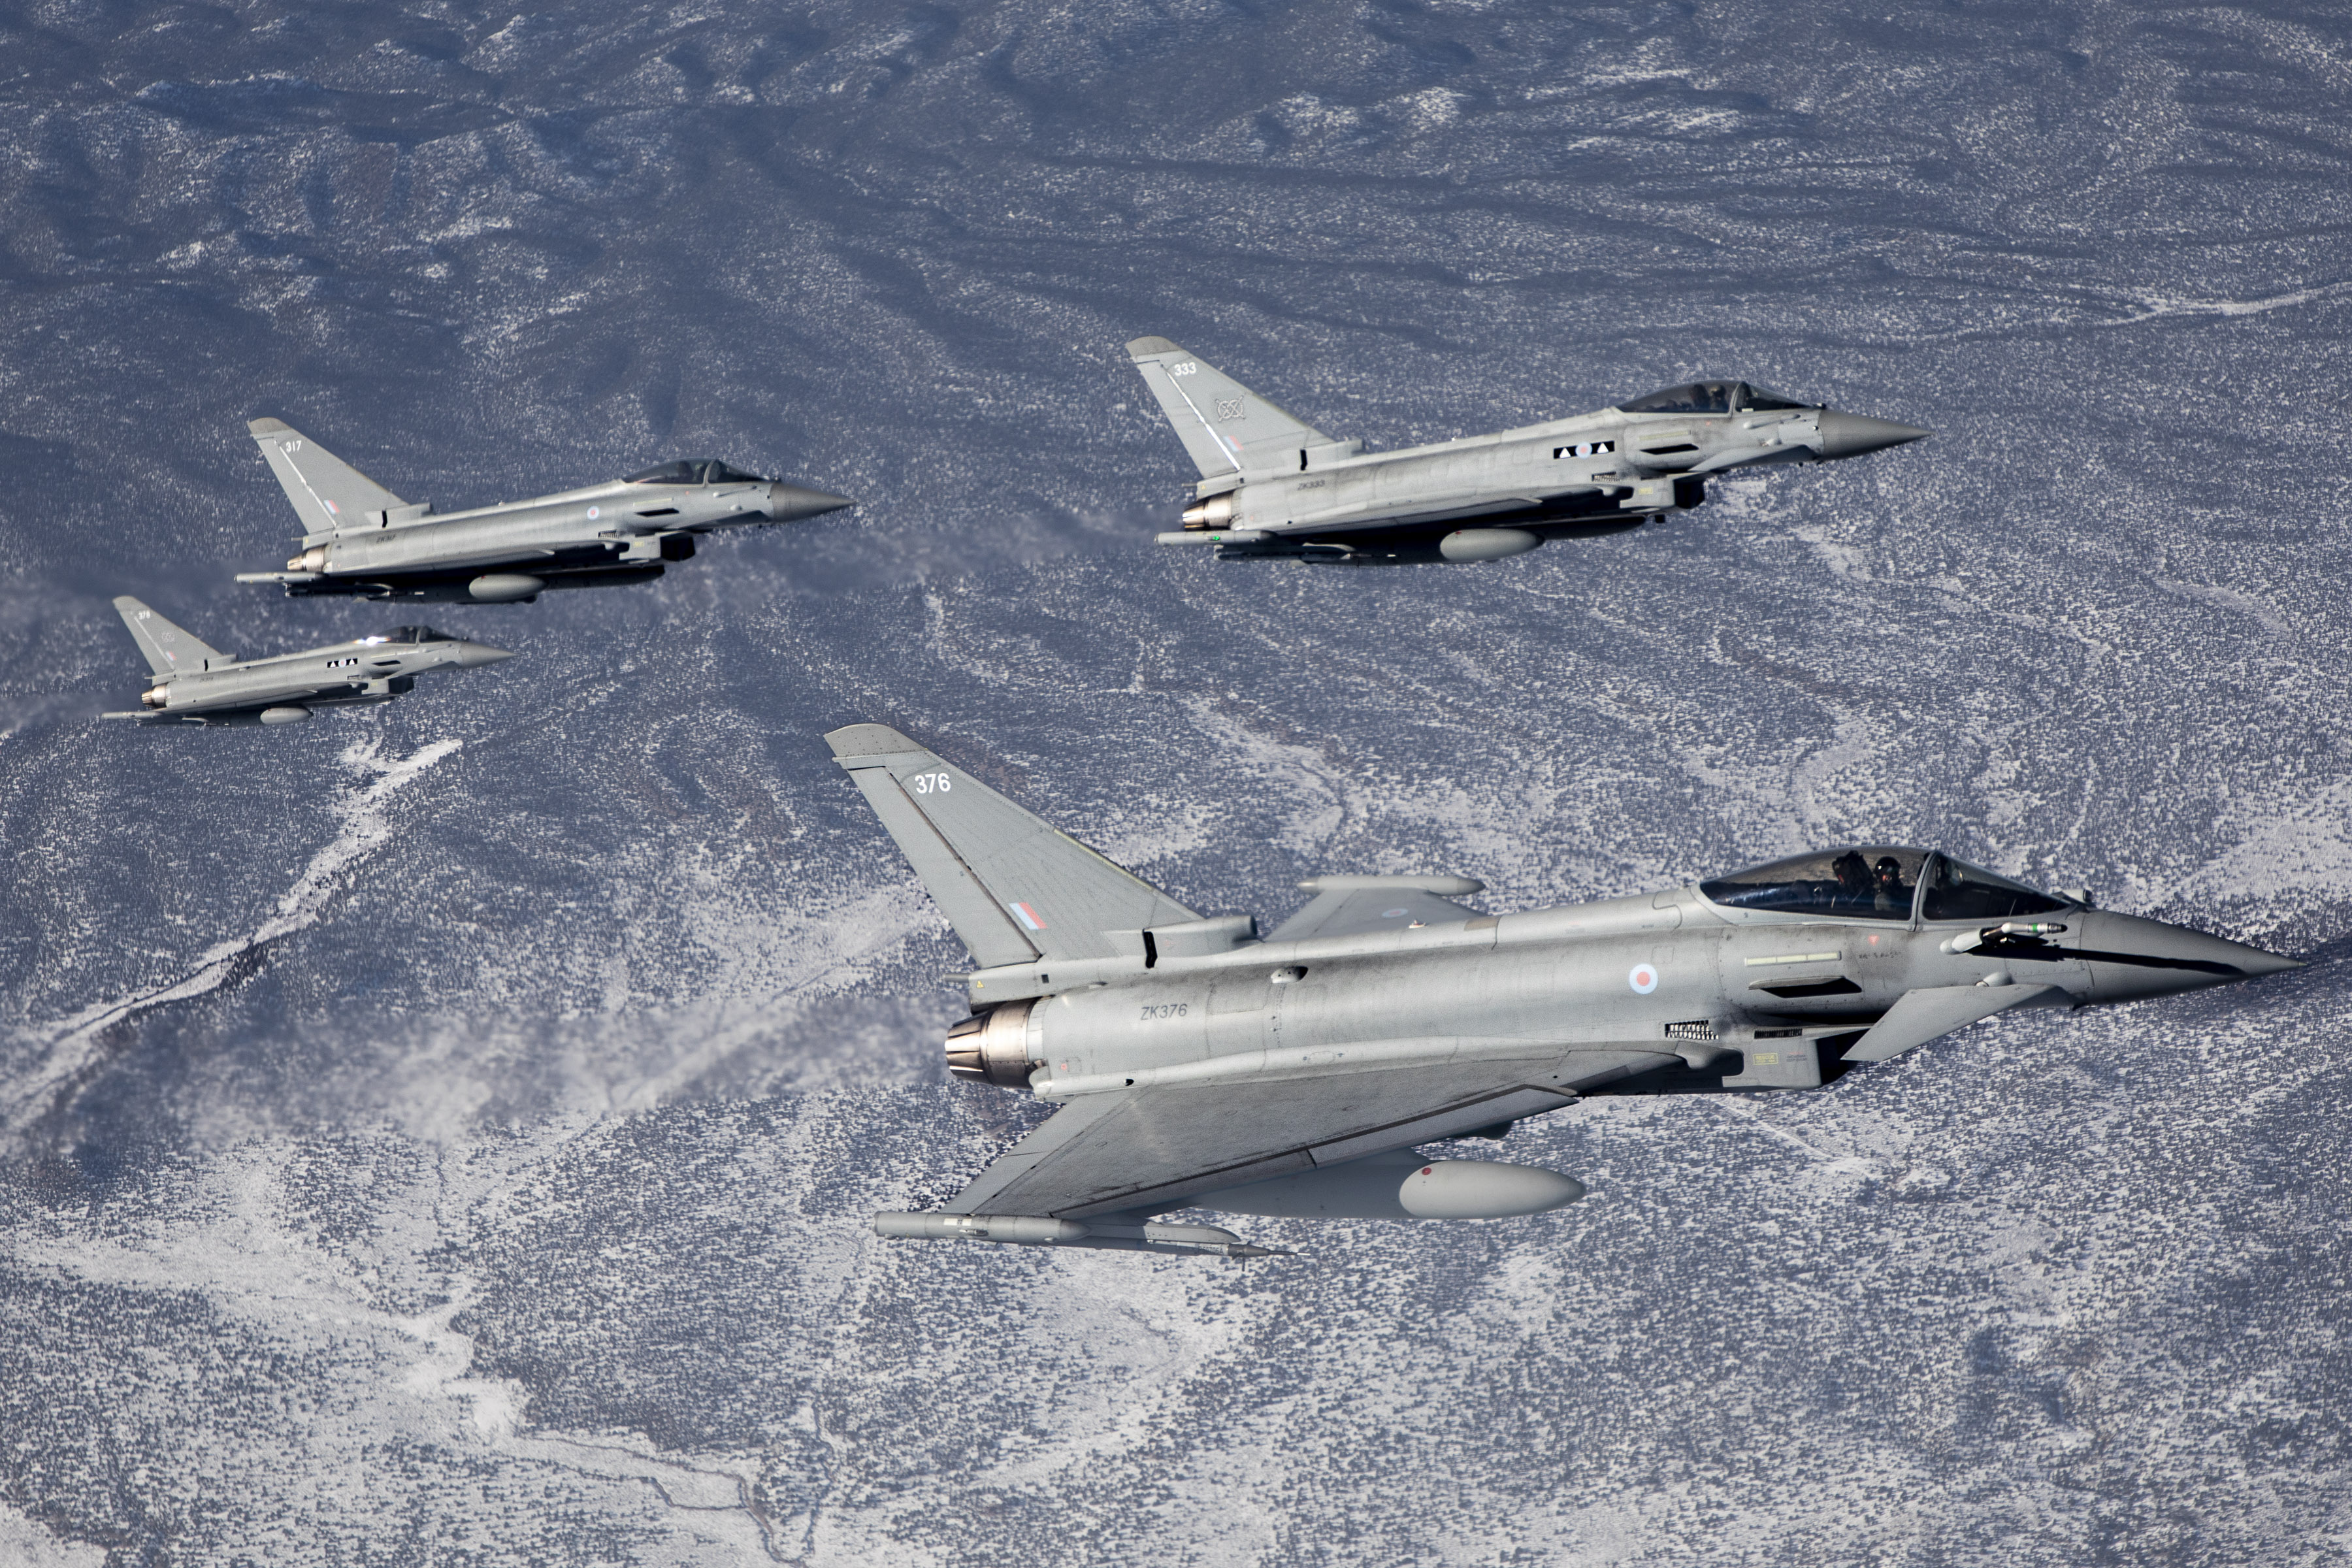 Image shows RAF Typhoon aircraft flying in formation.